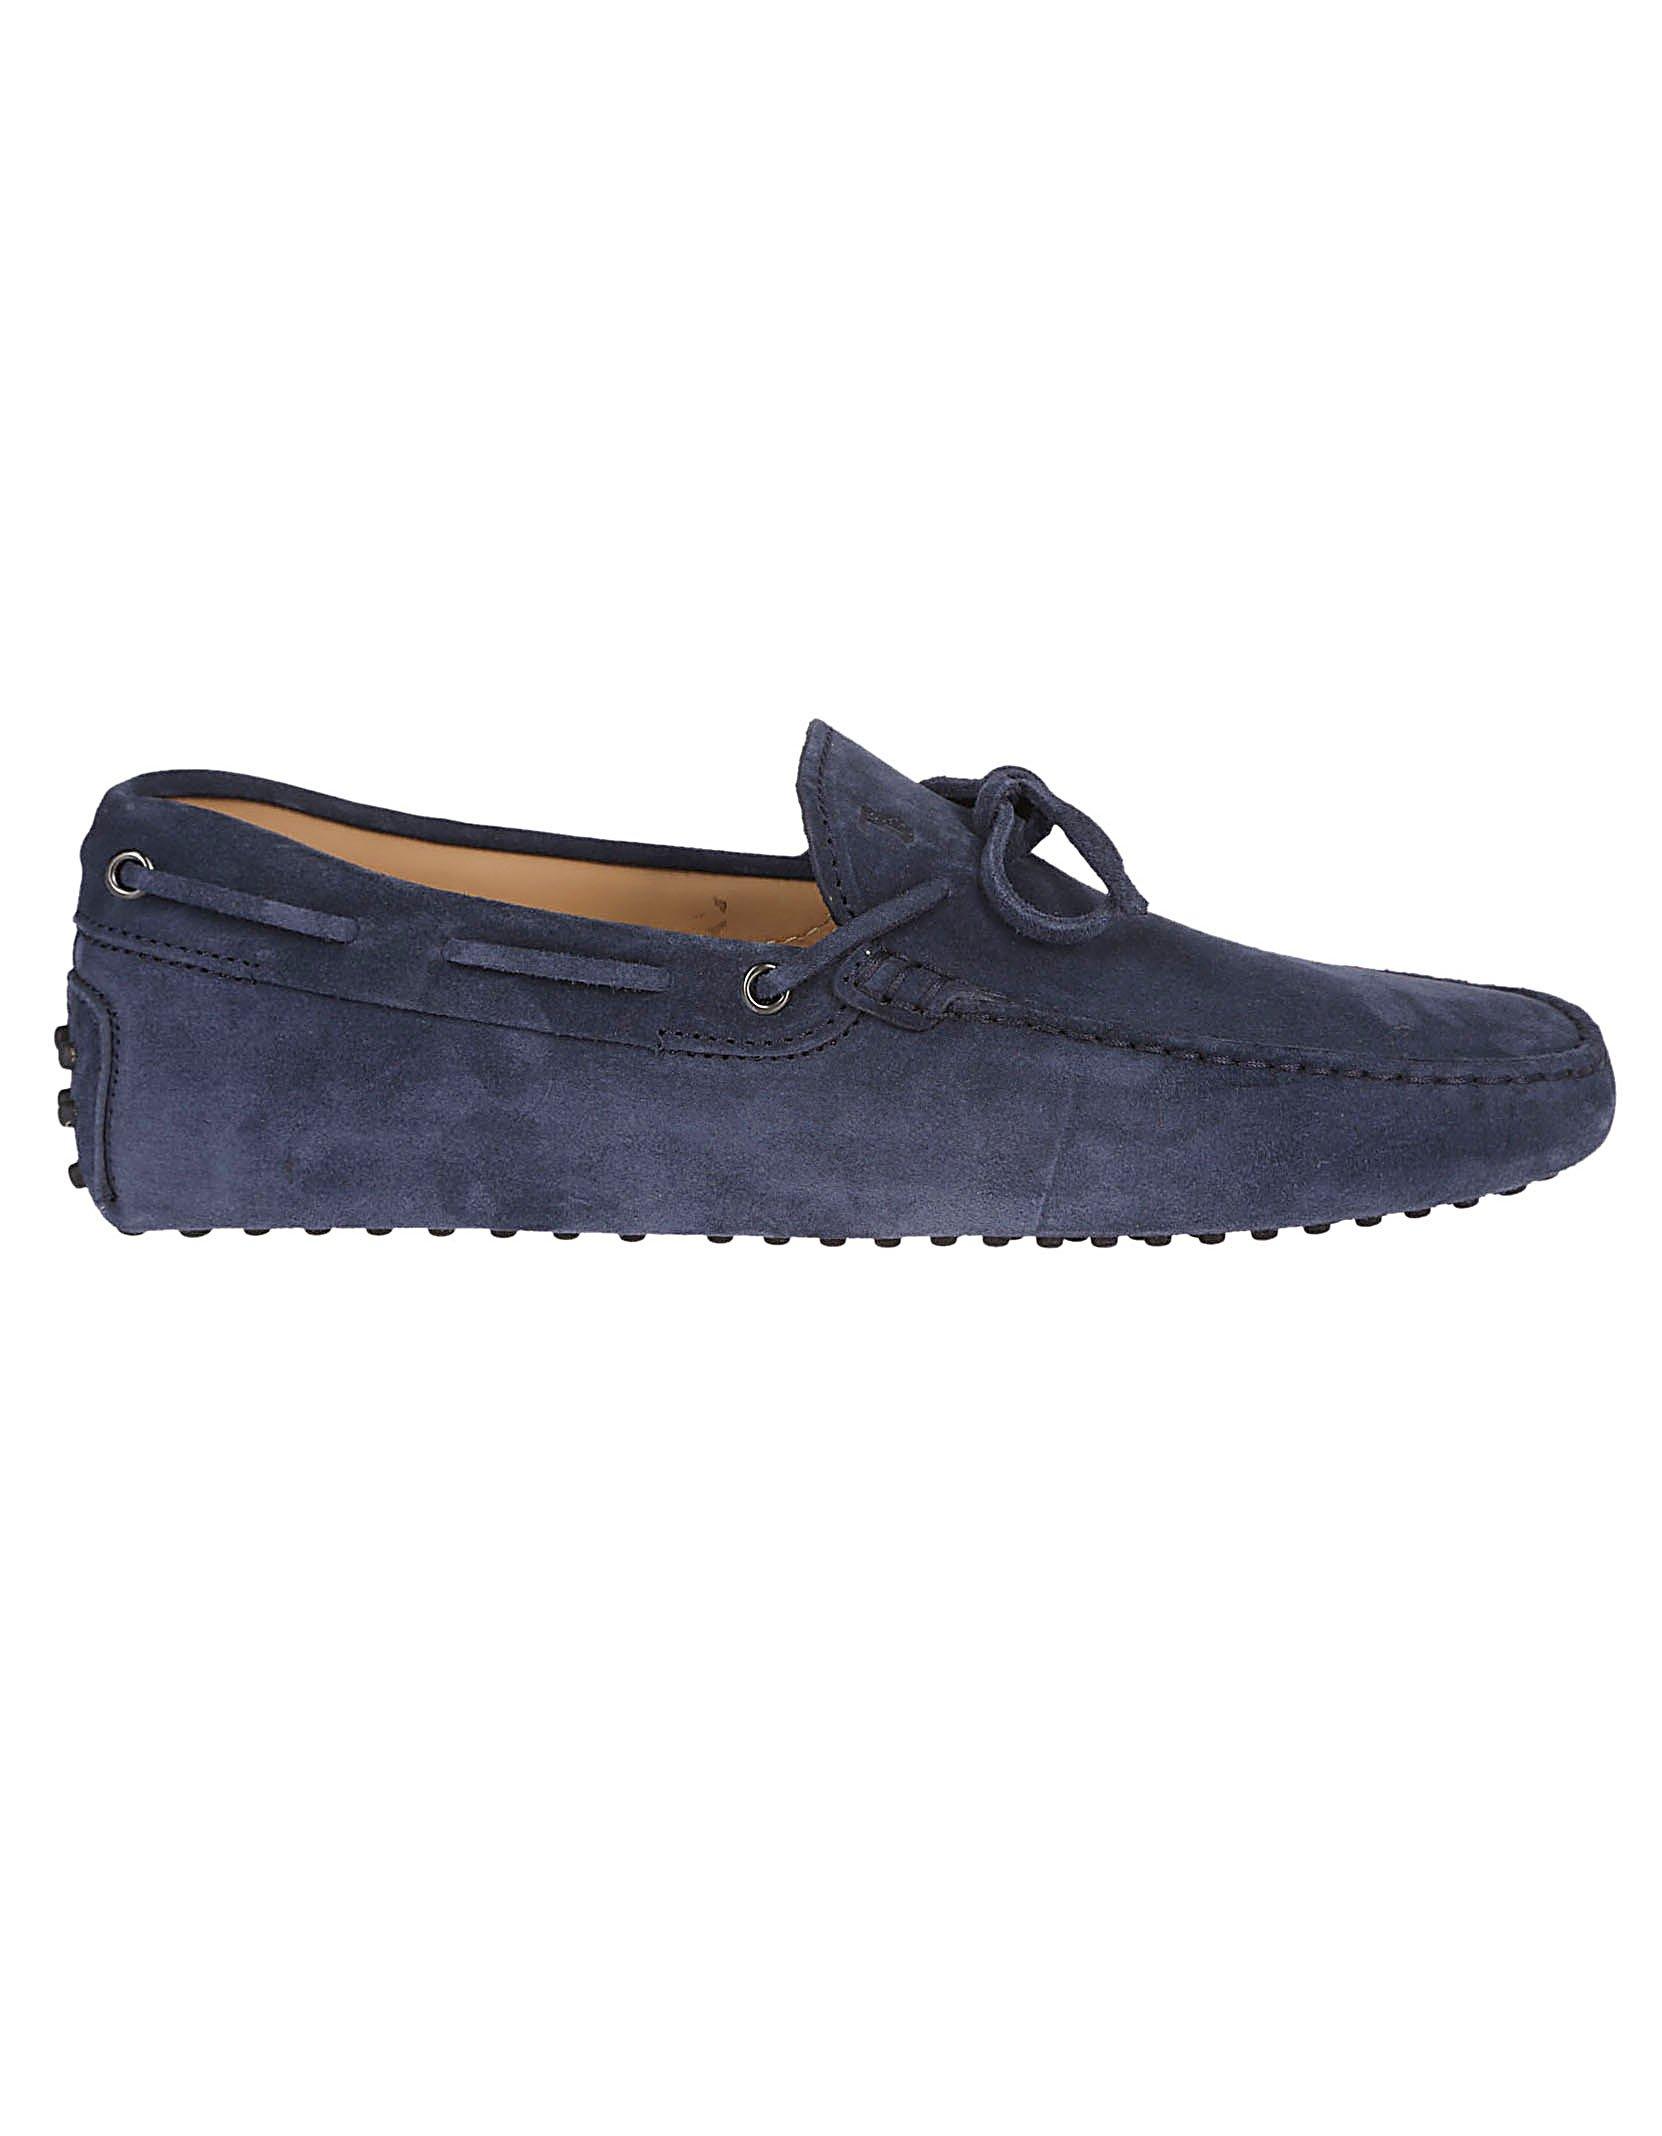 Tod's Leather Gommino Slip-on Loafers in Navy (Blue) for Men - Lyst